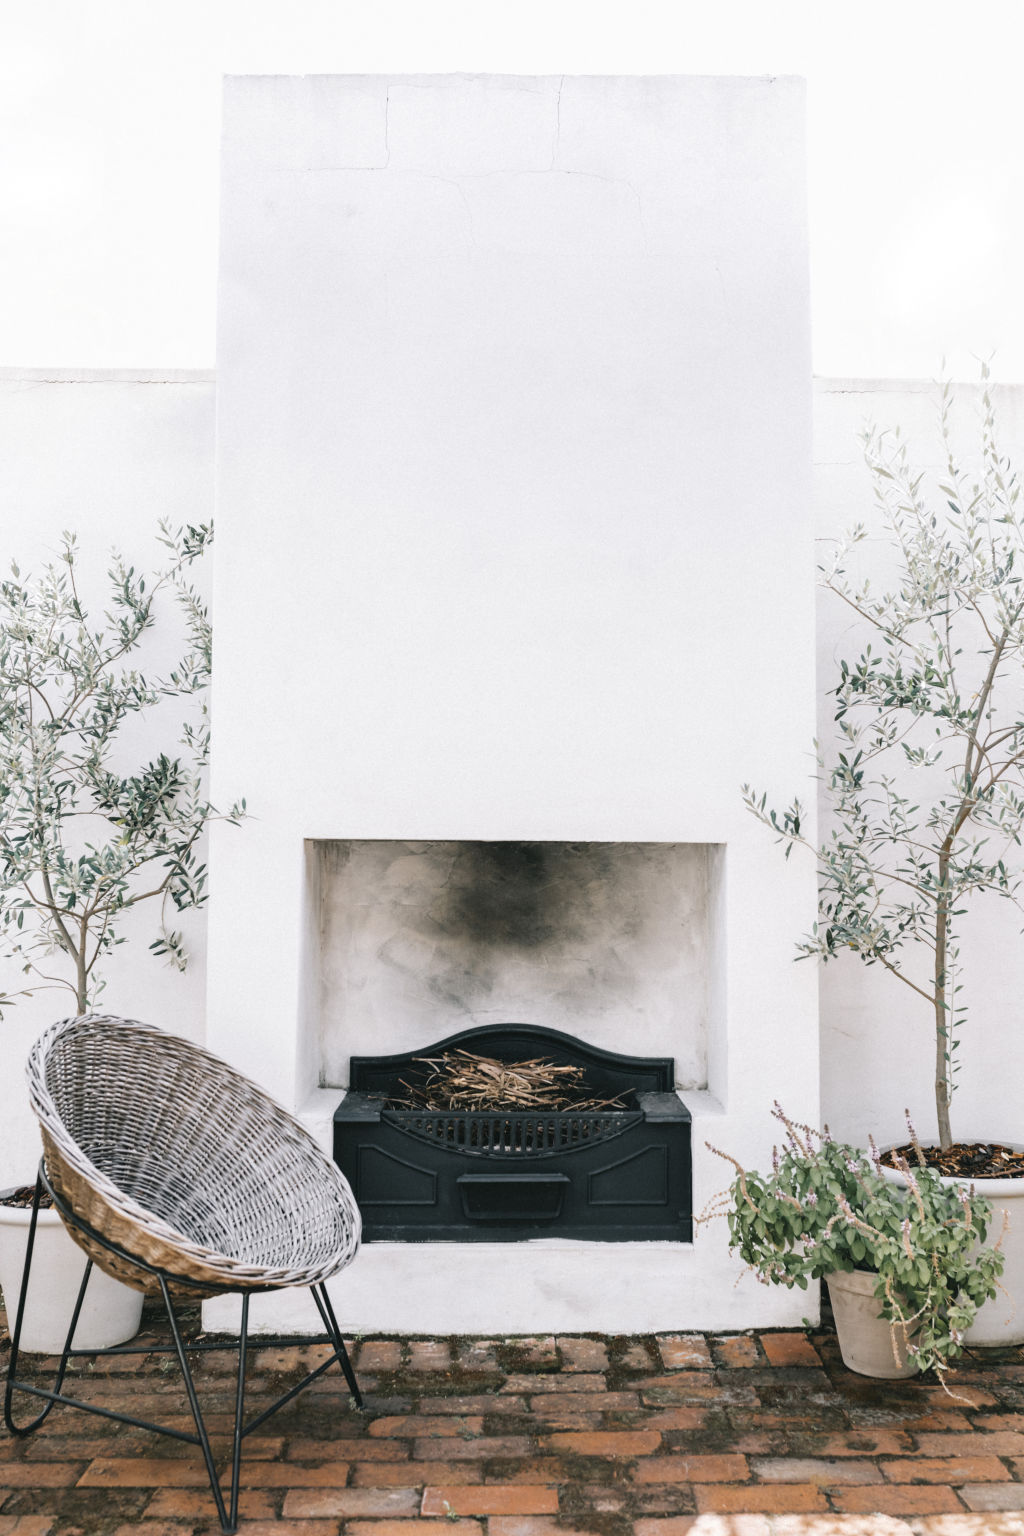 A cast-iron outdoor fireplace was salvaged from Ric and Moir’s family home renovation and is a feature in the courtyard. Photo: Natalie Salloum